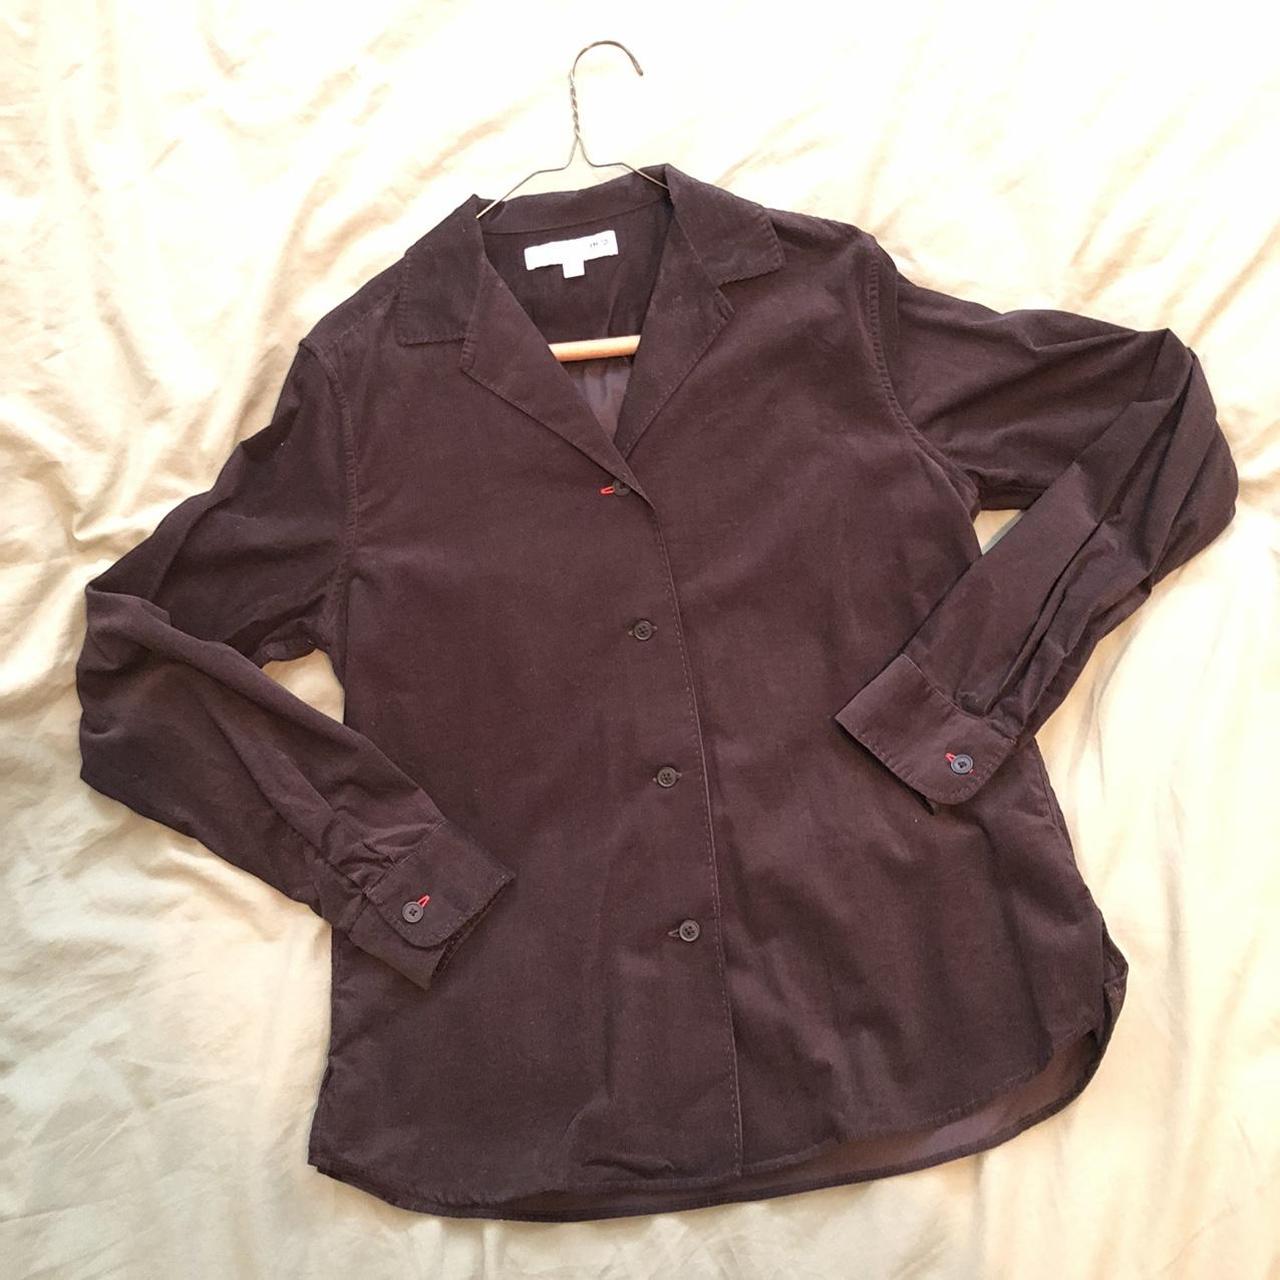 UNIQLO corduroy shirt in a gorgeous charcoal color.... - Depop